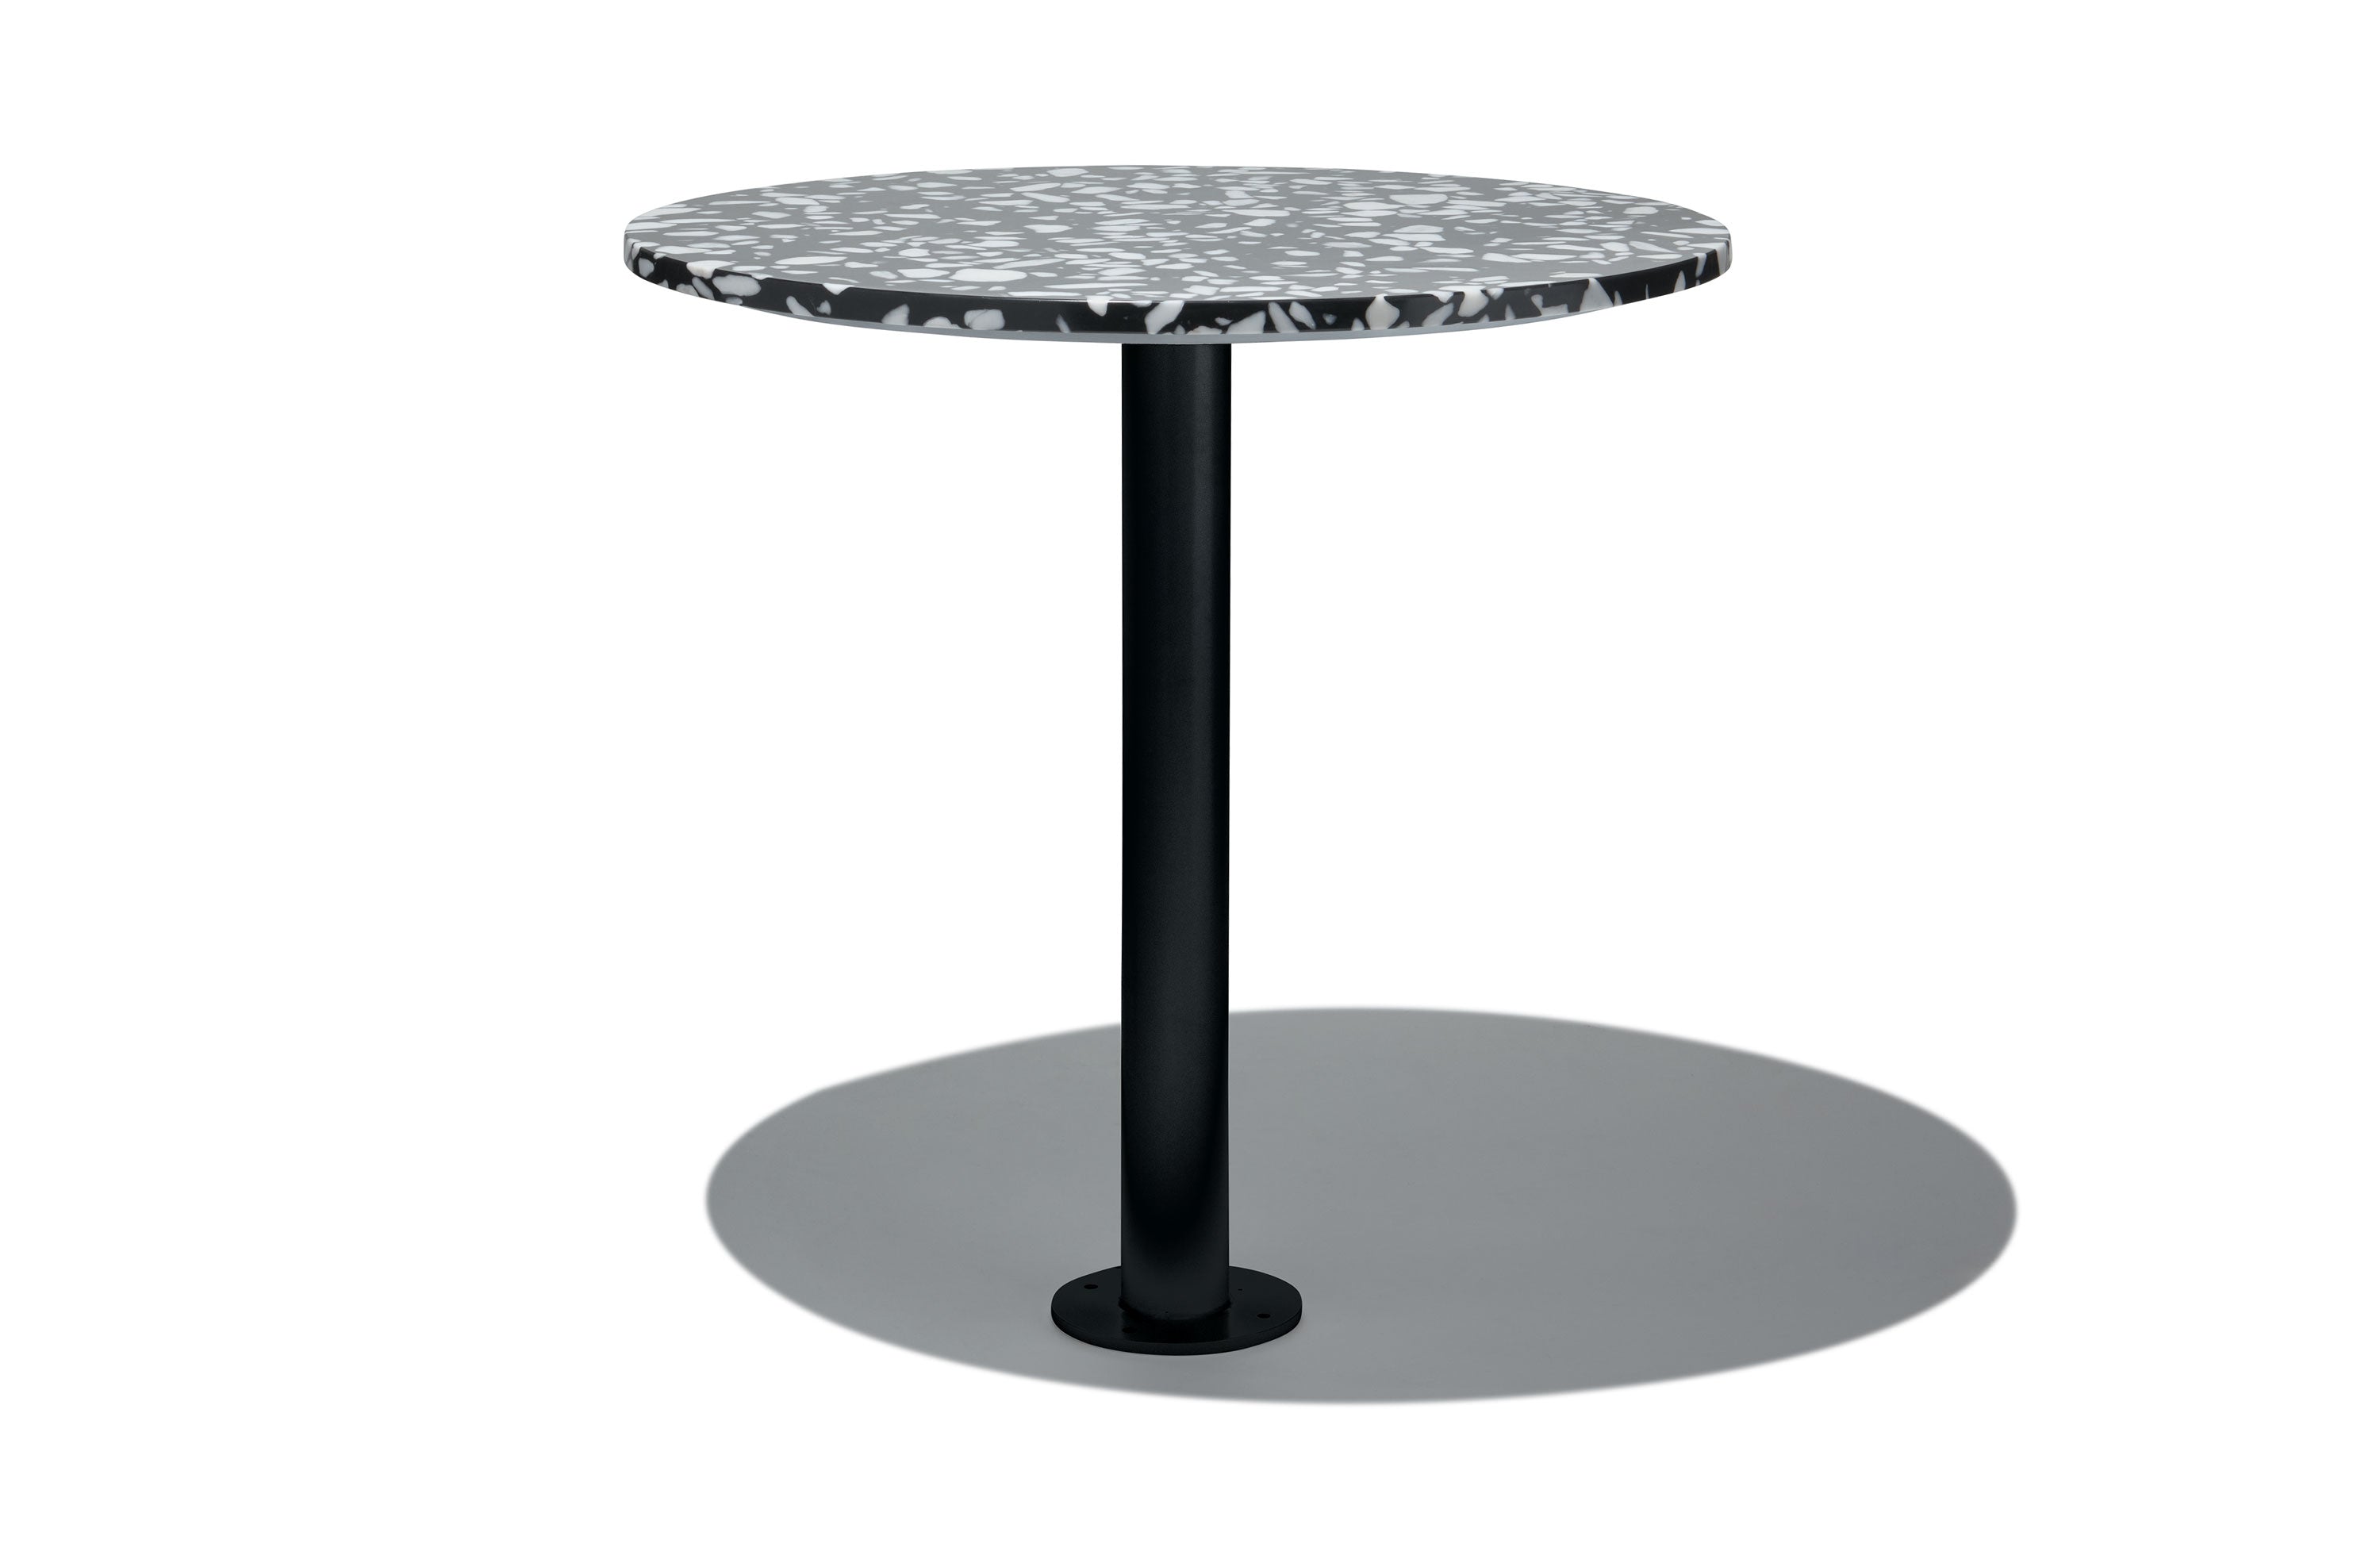 Piazza Affixed Table